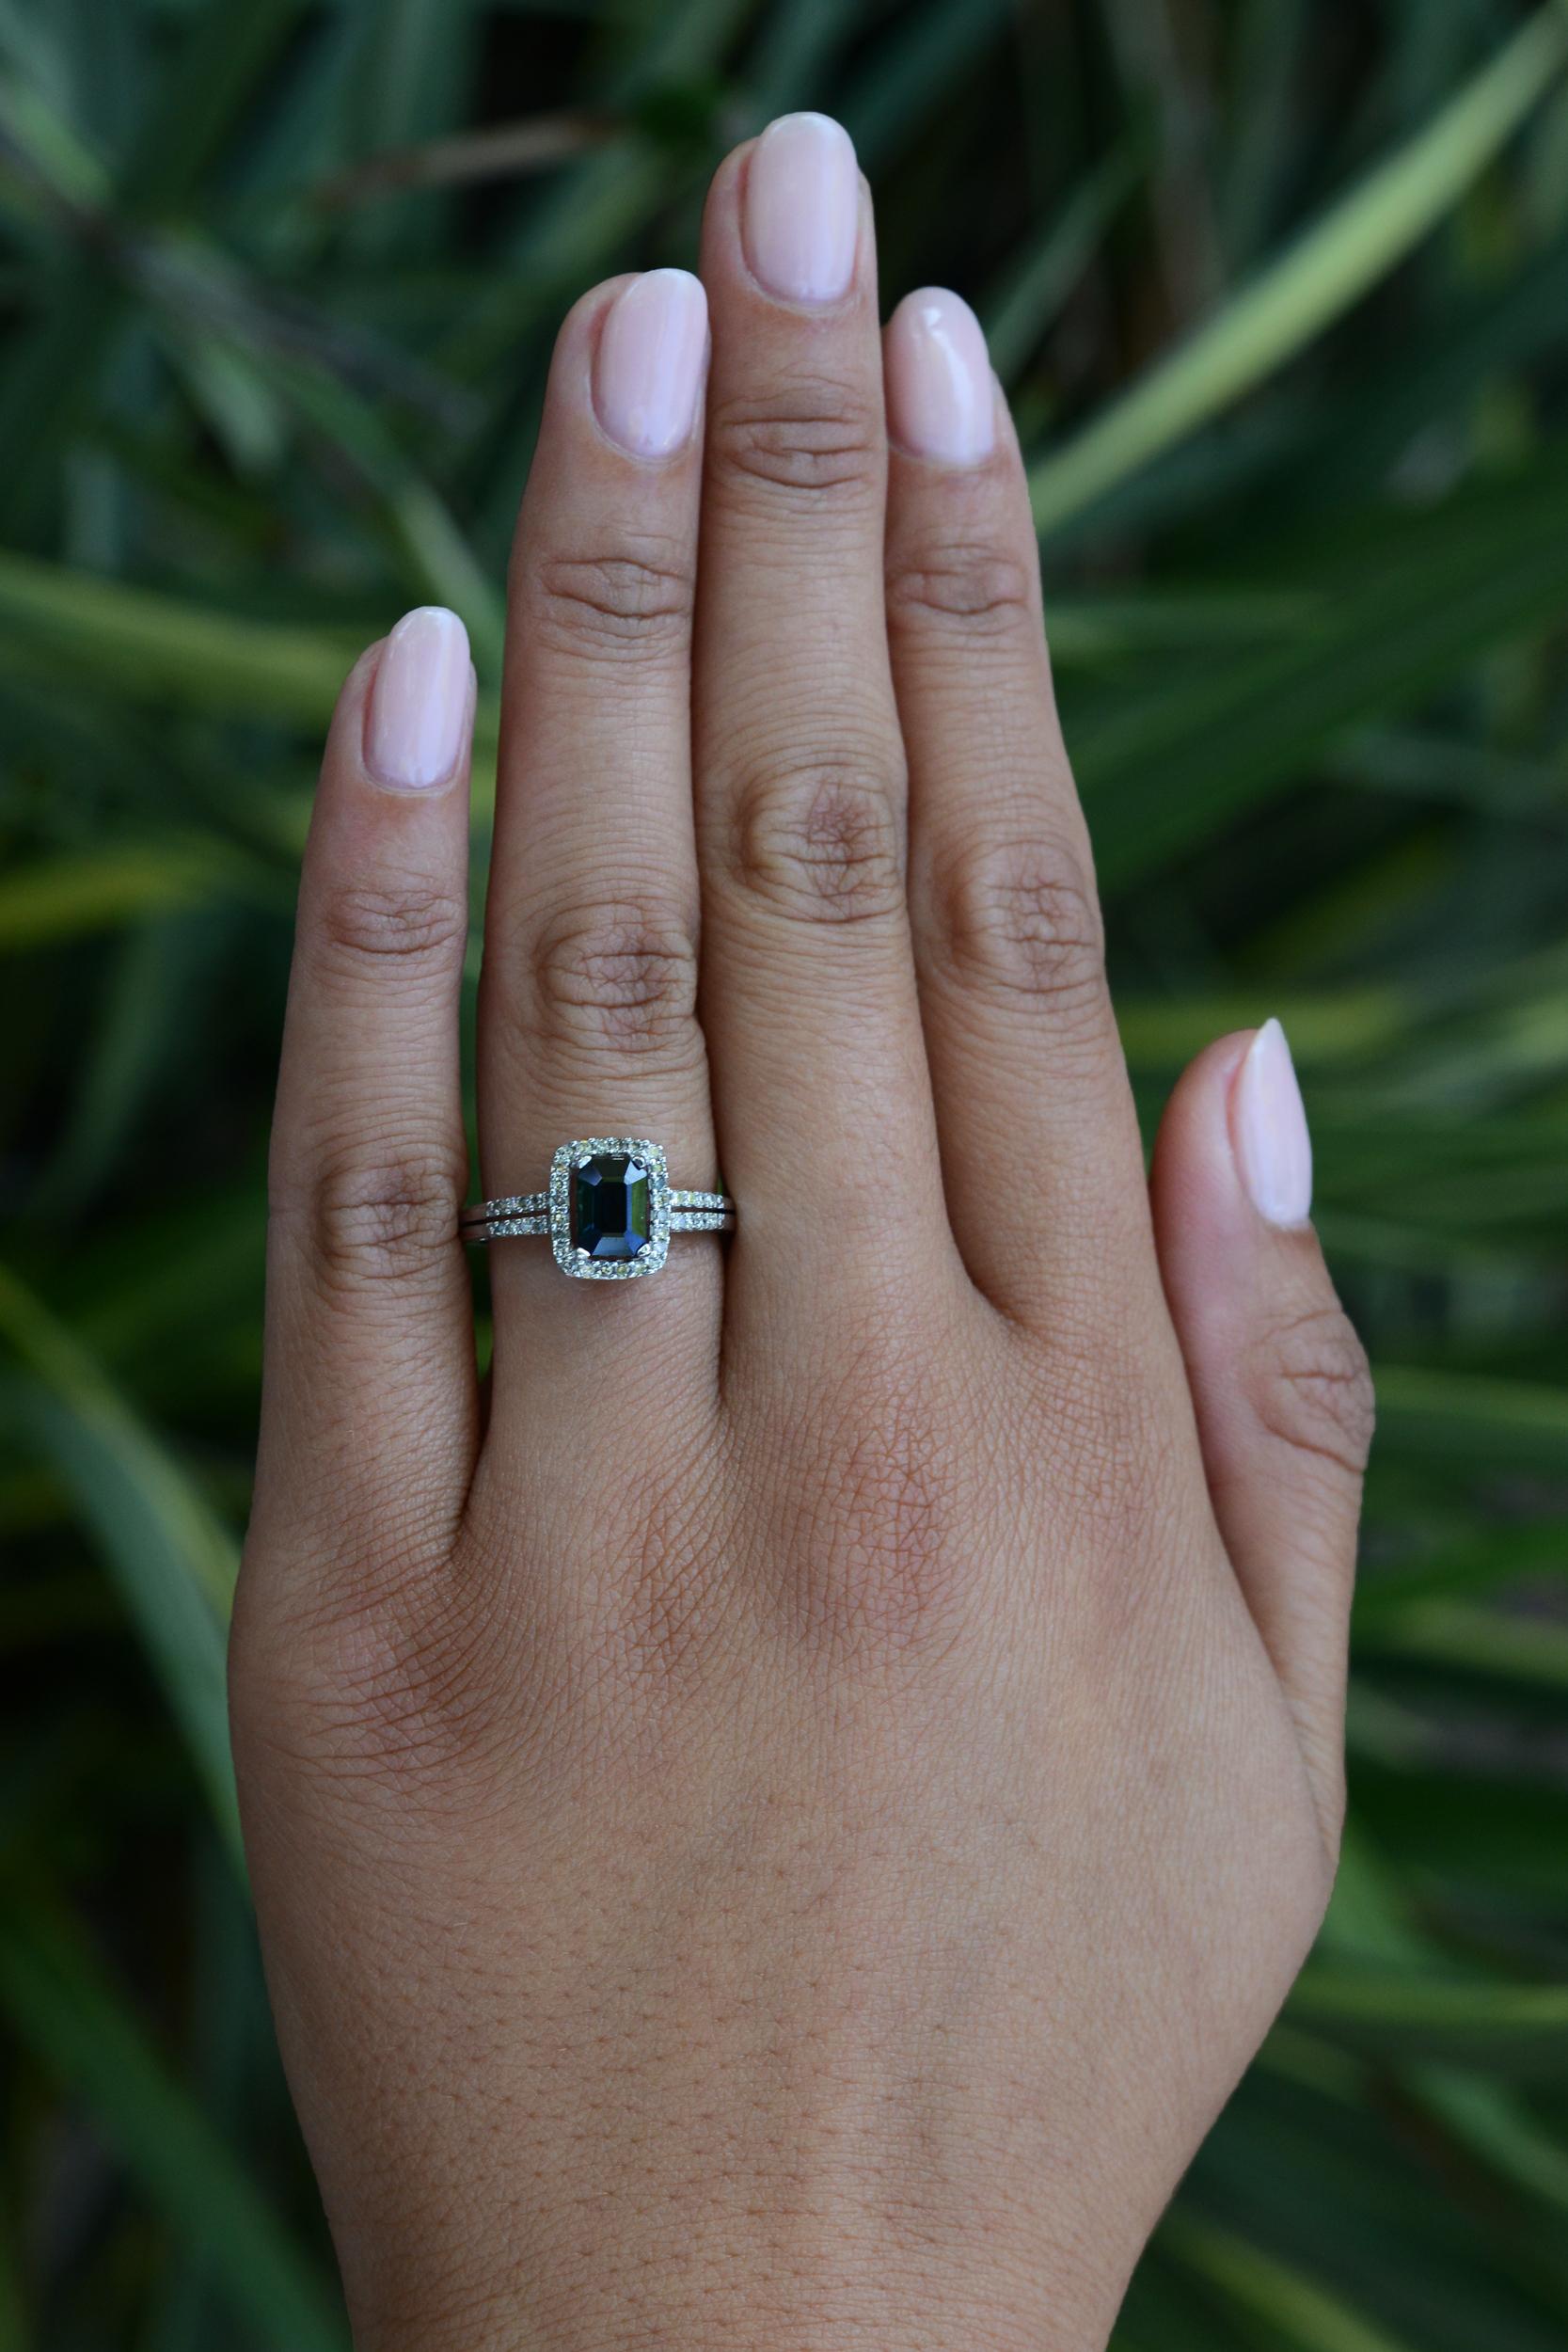 This contemporary classic estate engagement ring has a big personality and a small price. The vintage gemstone bridal ring holds a deep night blue sapphire weighing a prominent 1.15 carats. The silky sapphire is enveloped in a modern split shank